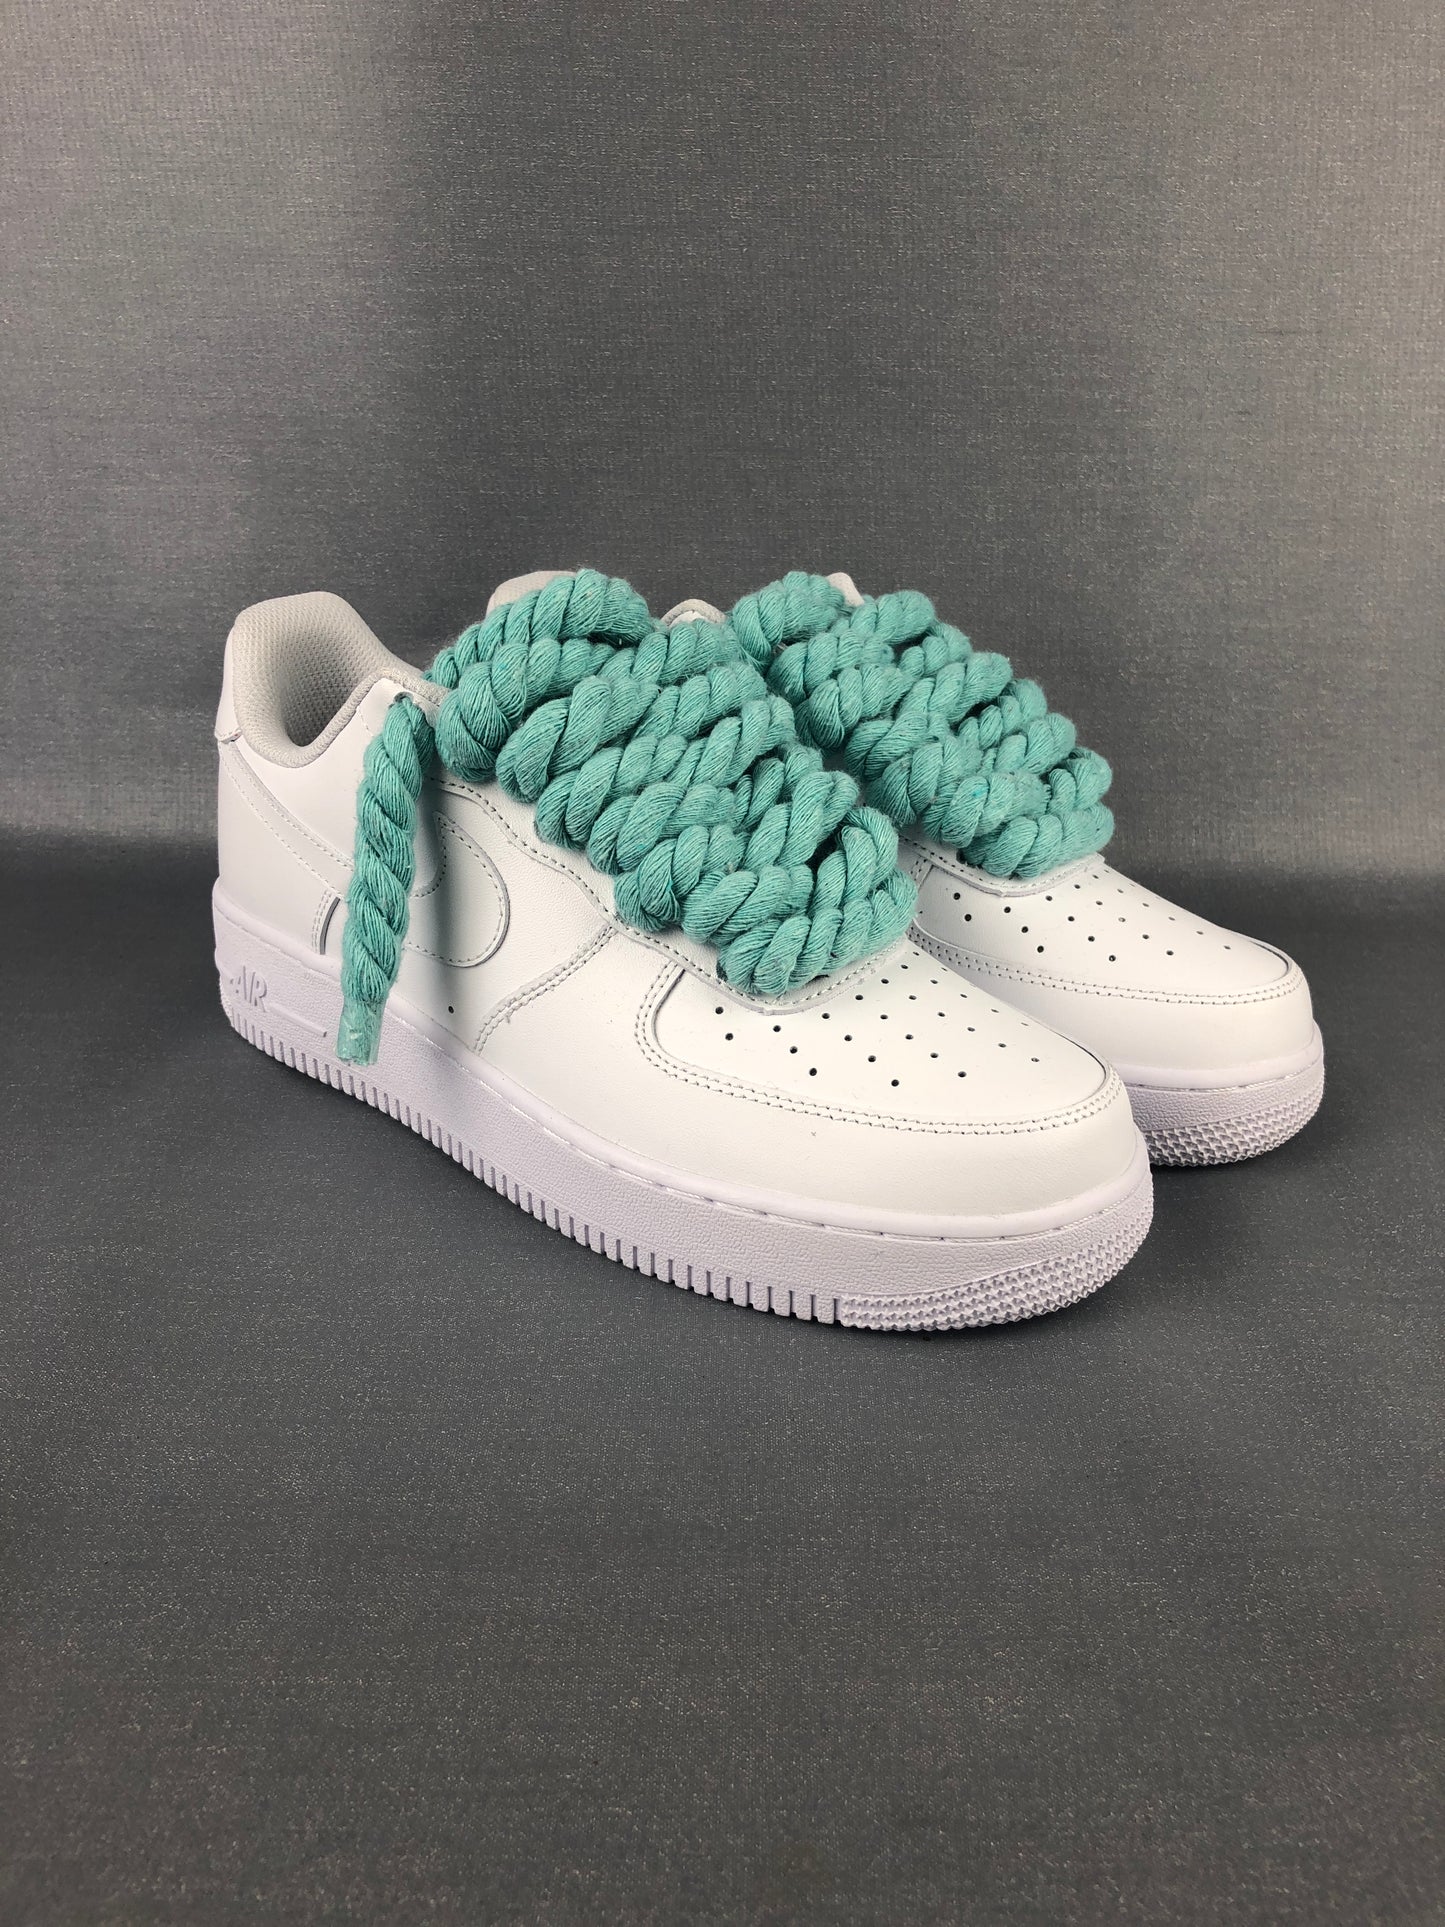 AF1 White | Rope Forces Baby Blue 